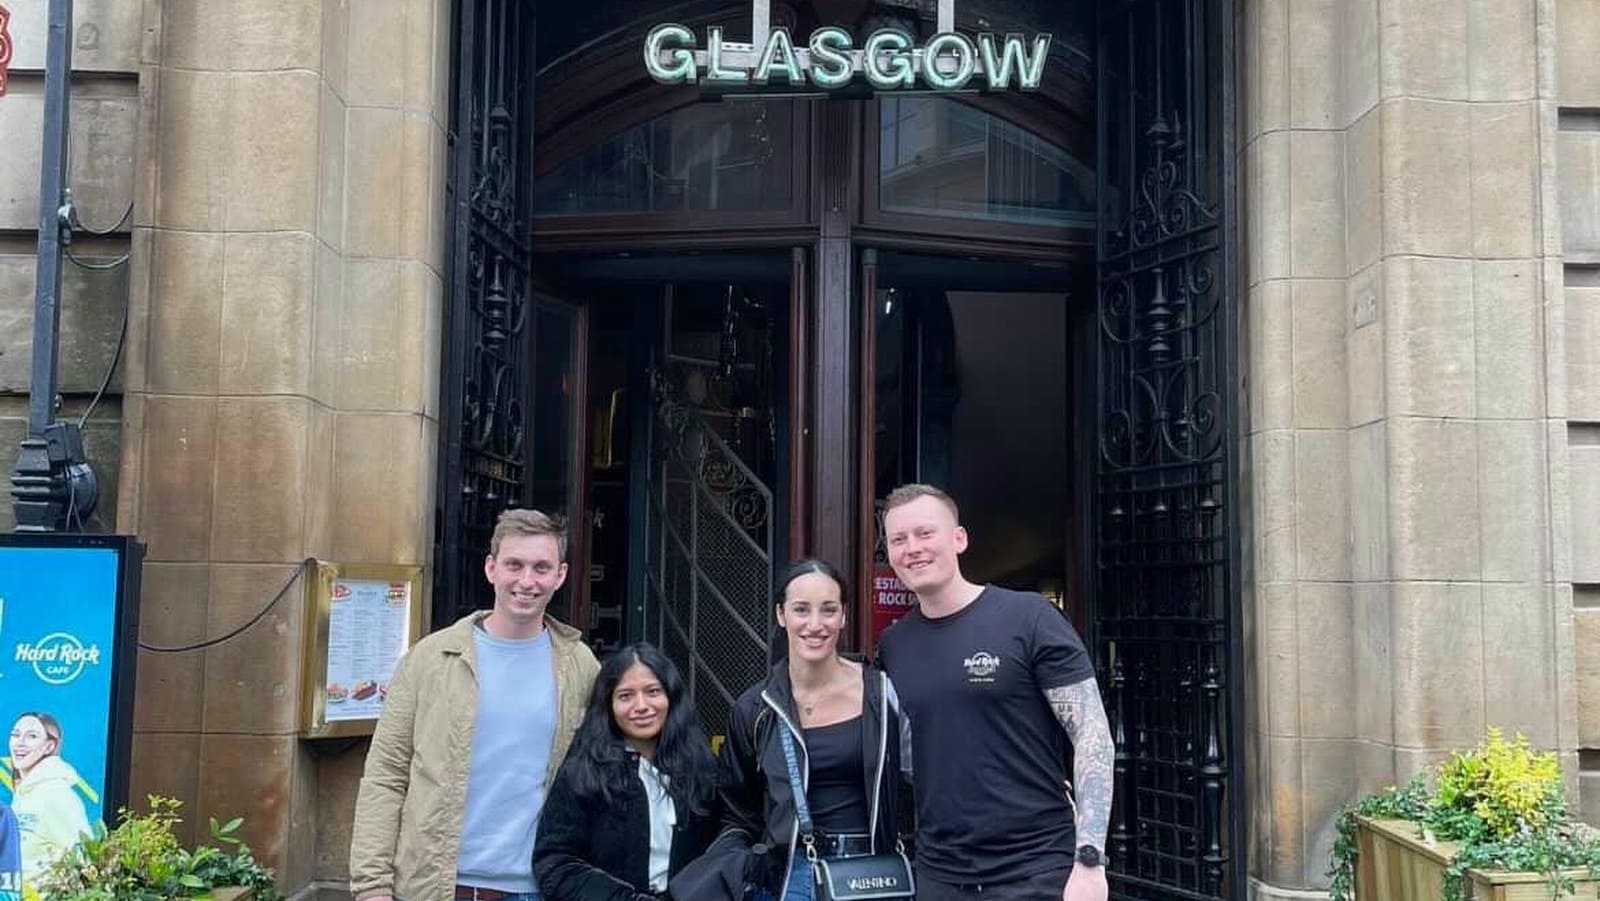 Meeting a lovely collector couple in Glasgow